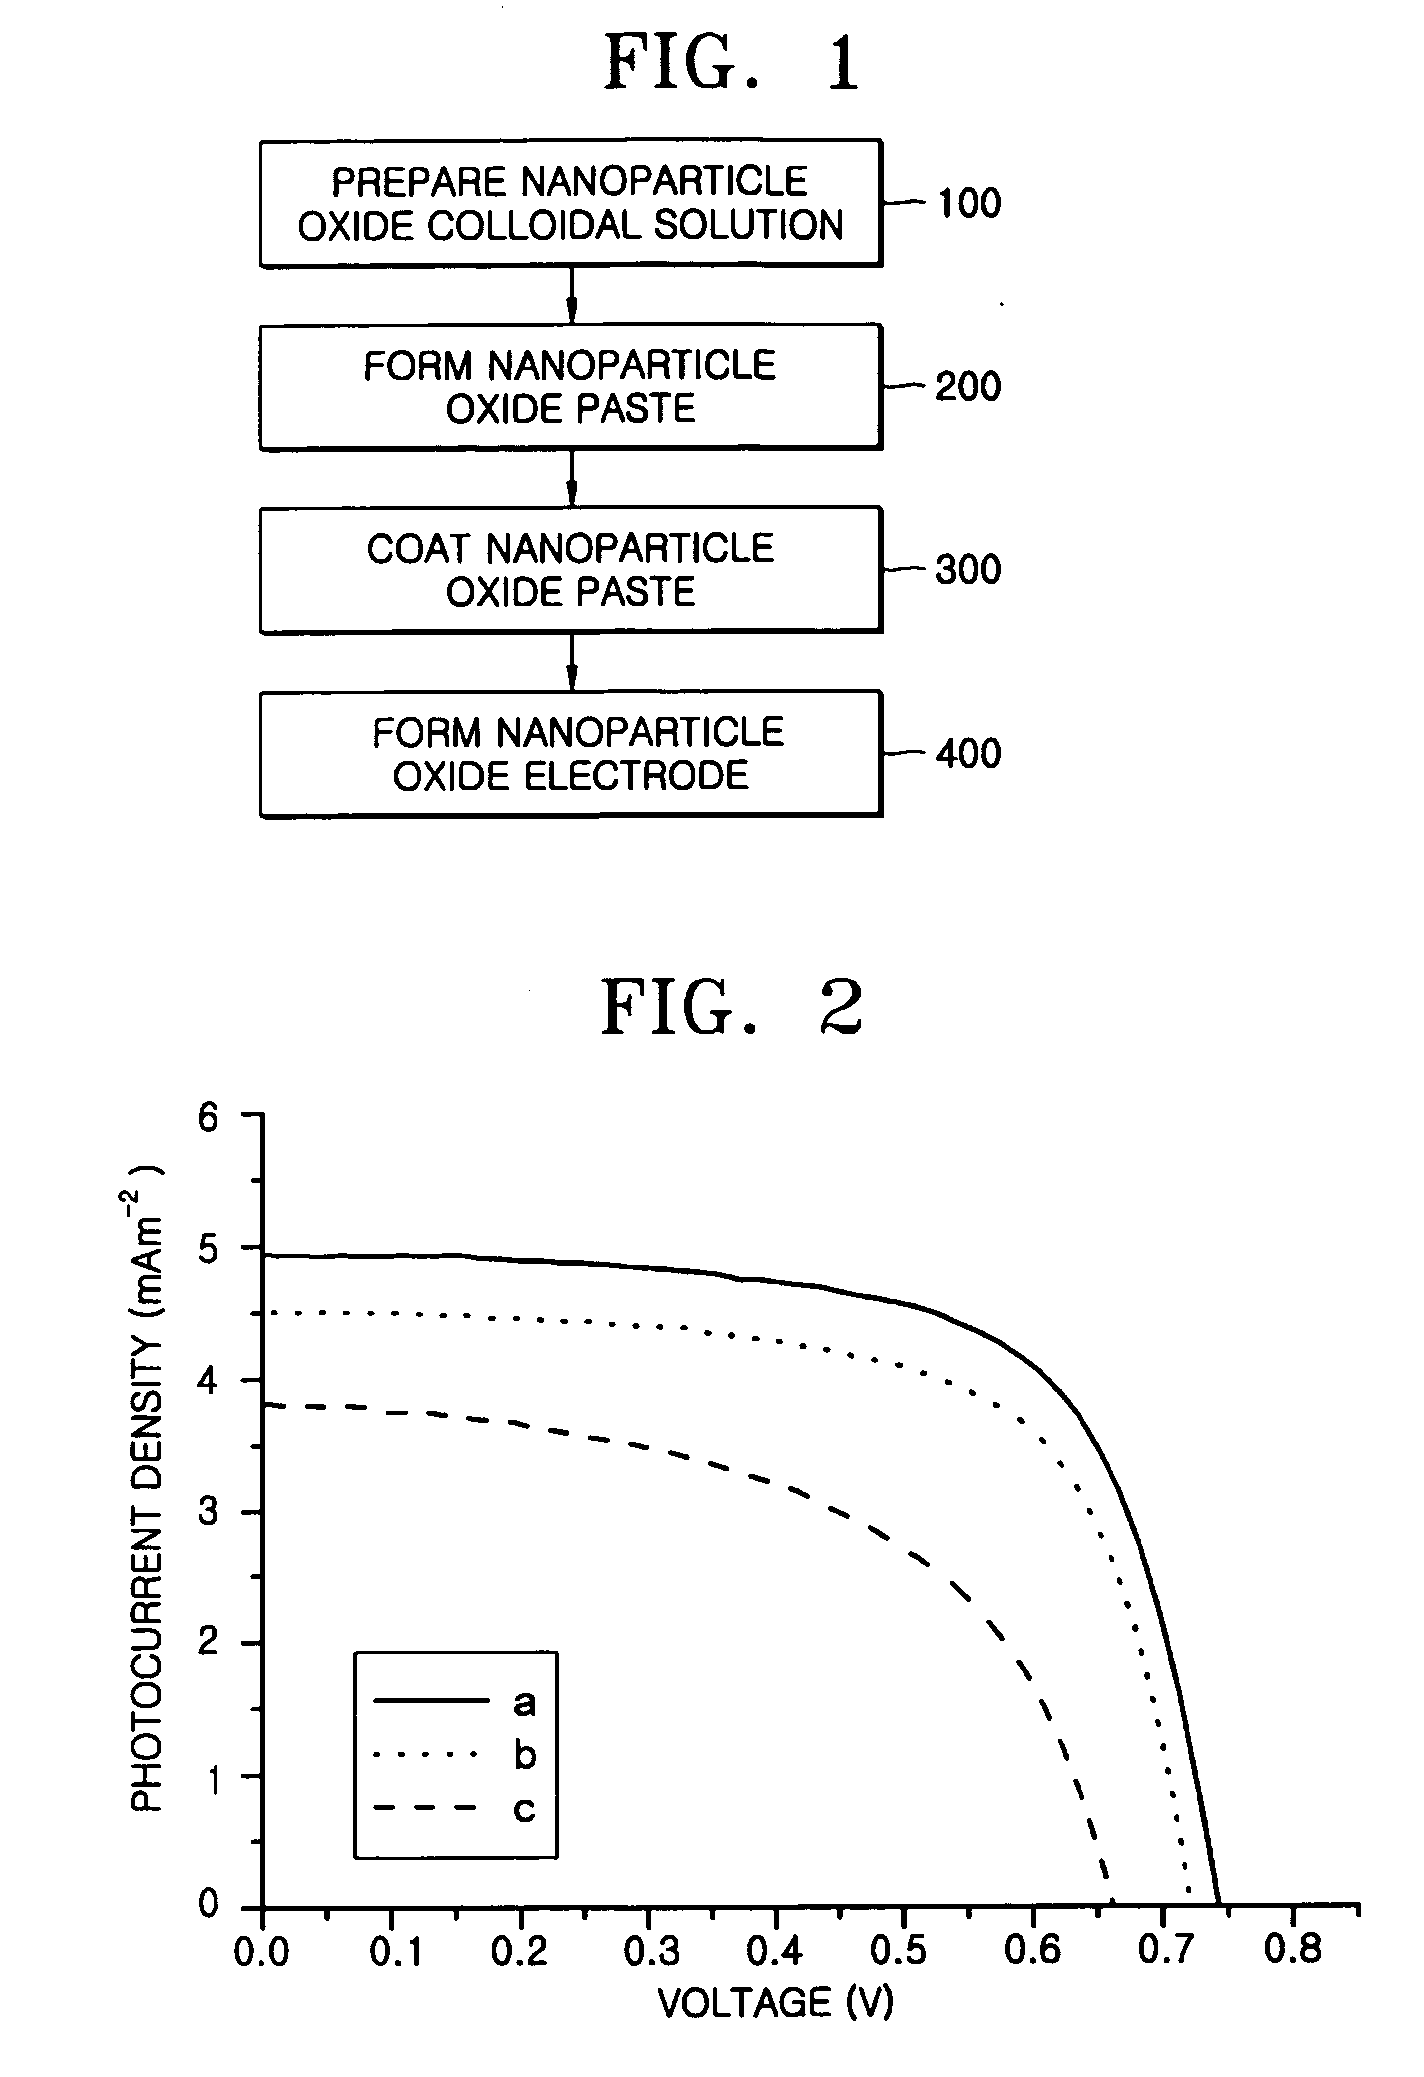 Method of forming nanoparticle oxide electrode of plastic-type dye-sensitized solar cell using high viscosity nanoparticle oxide paste without binder